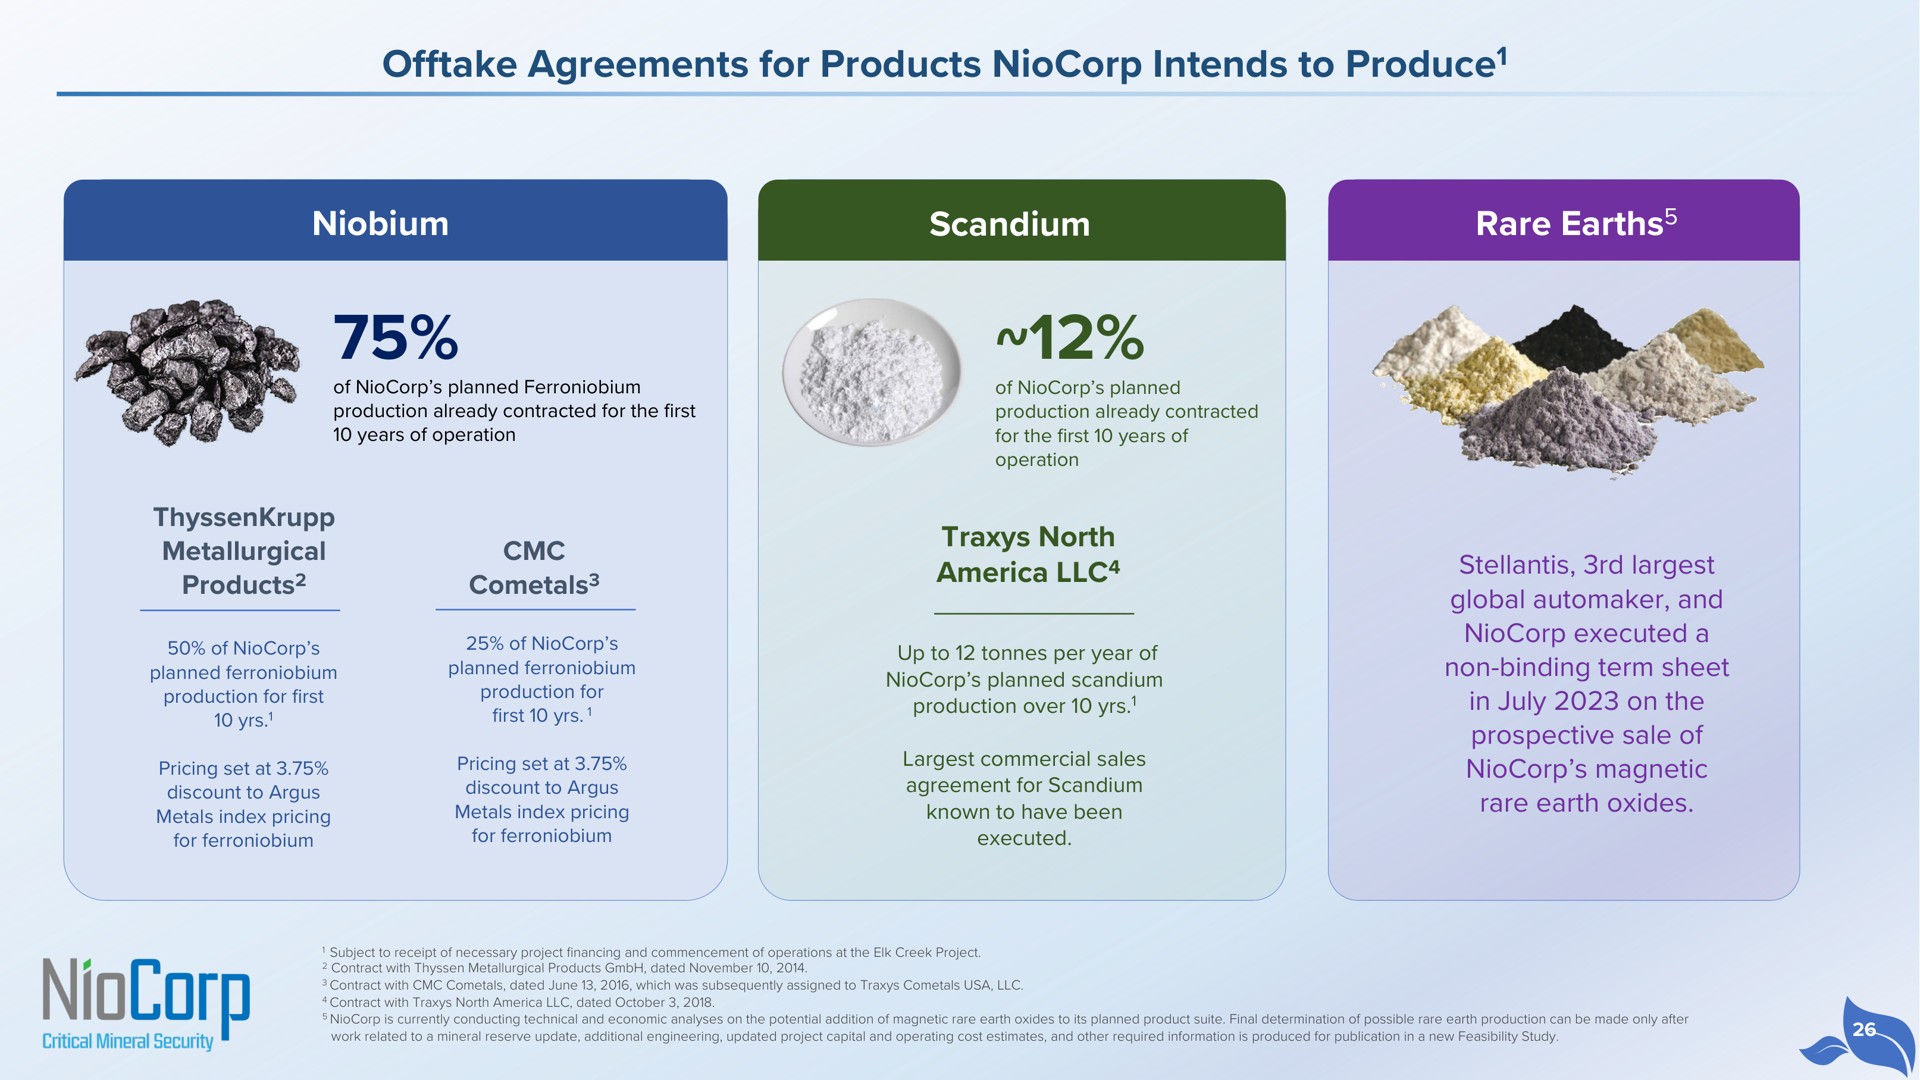 offtake agreements for products intends to produce niobium scandium rare earths produce comenic north gee ats a ate | NioCorp